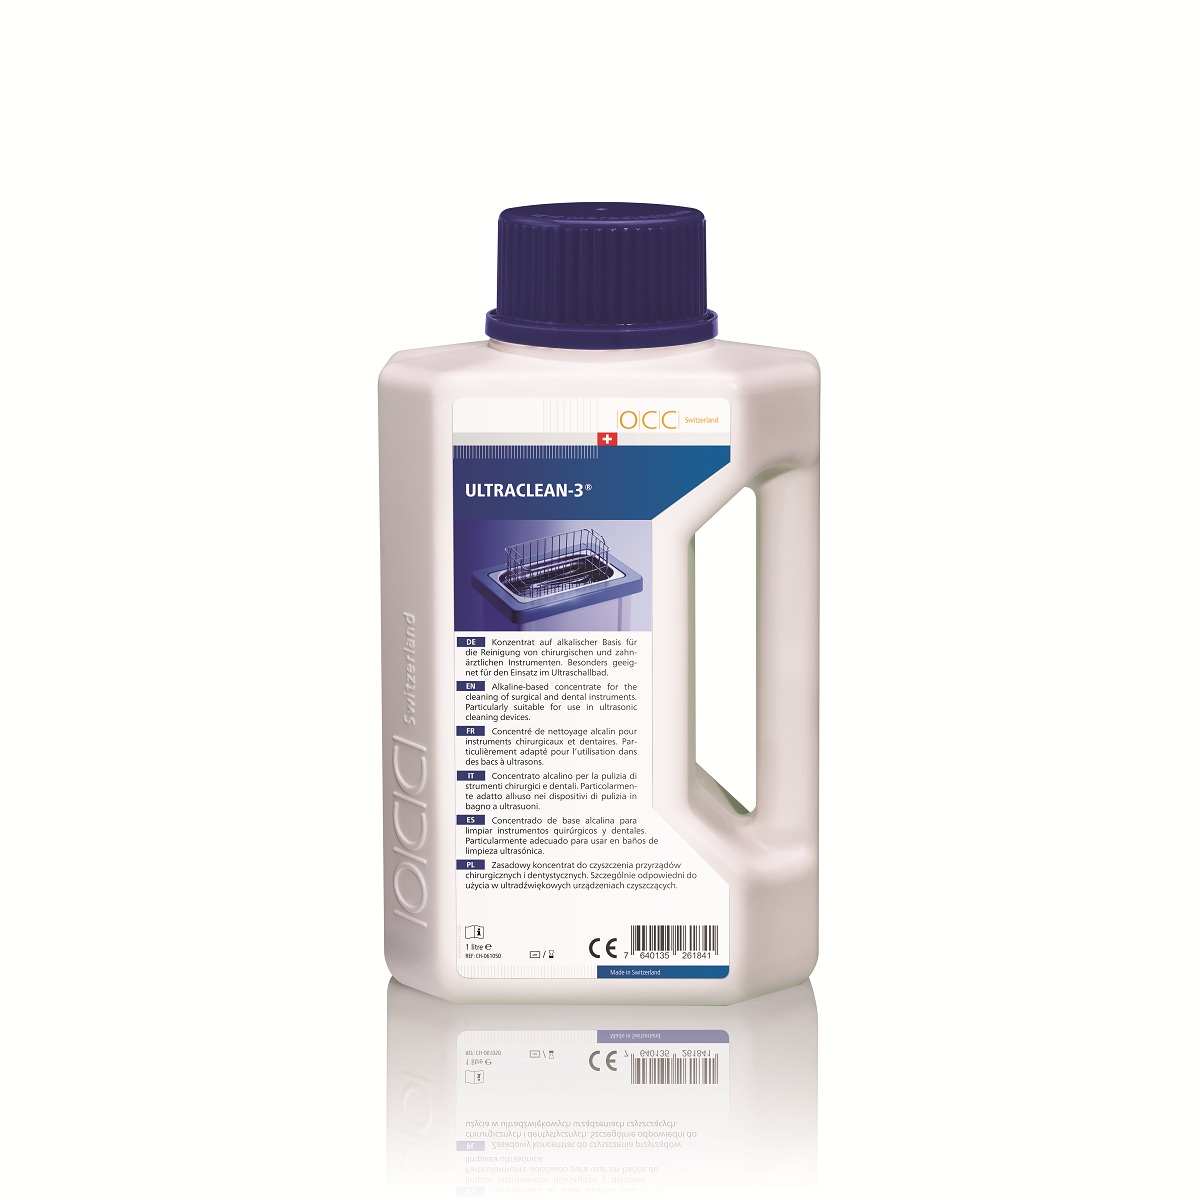 ULTRACLEAN-3_1_litre_bottle_with_handle_white_background_1200x1200.jpg